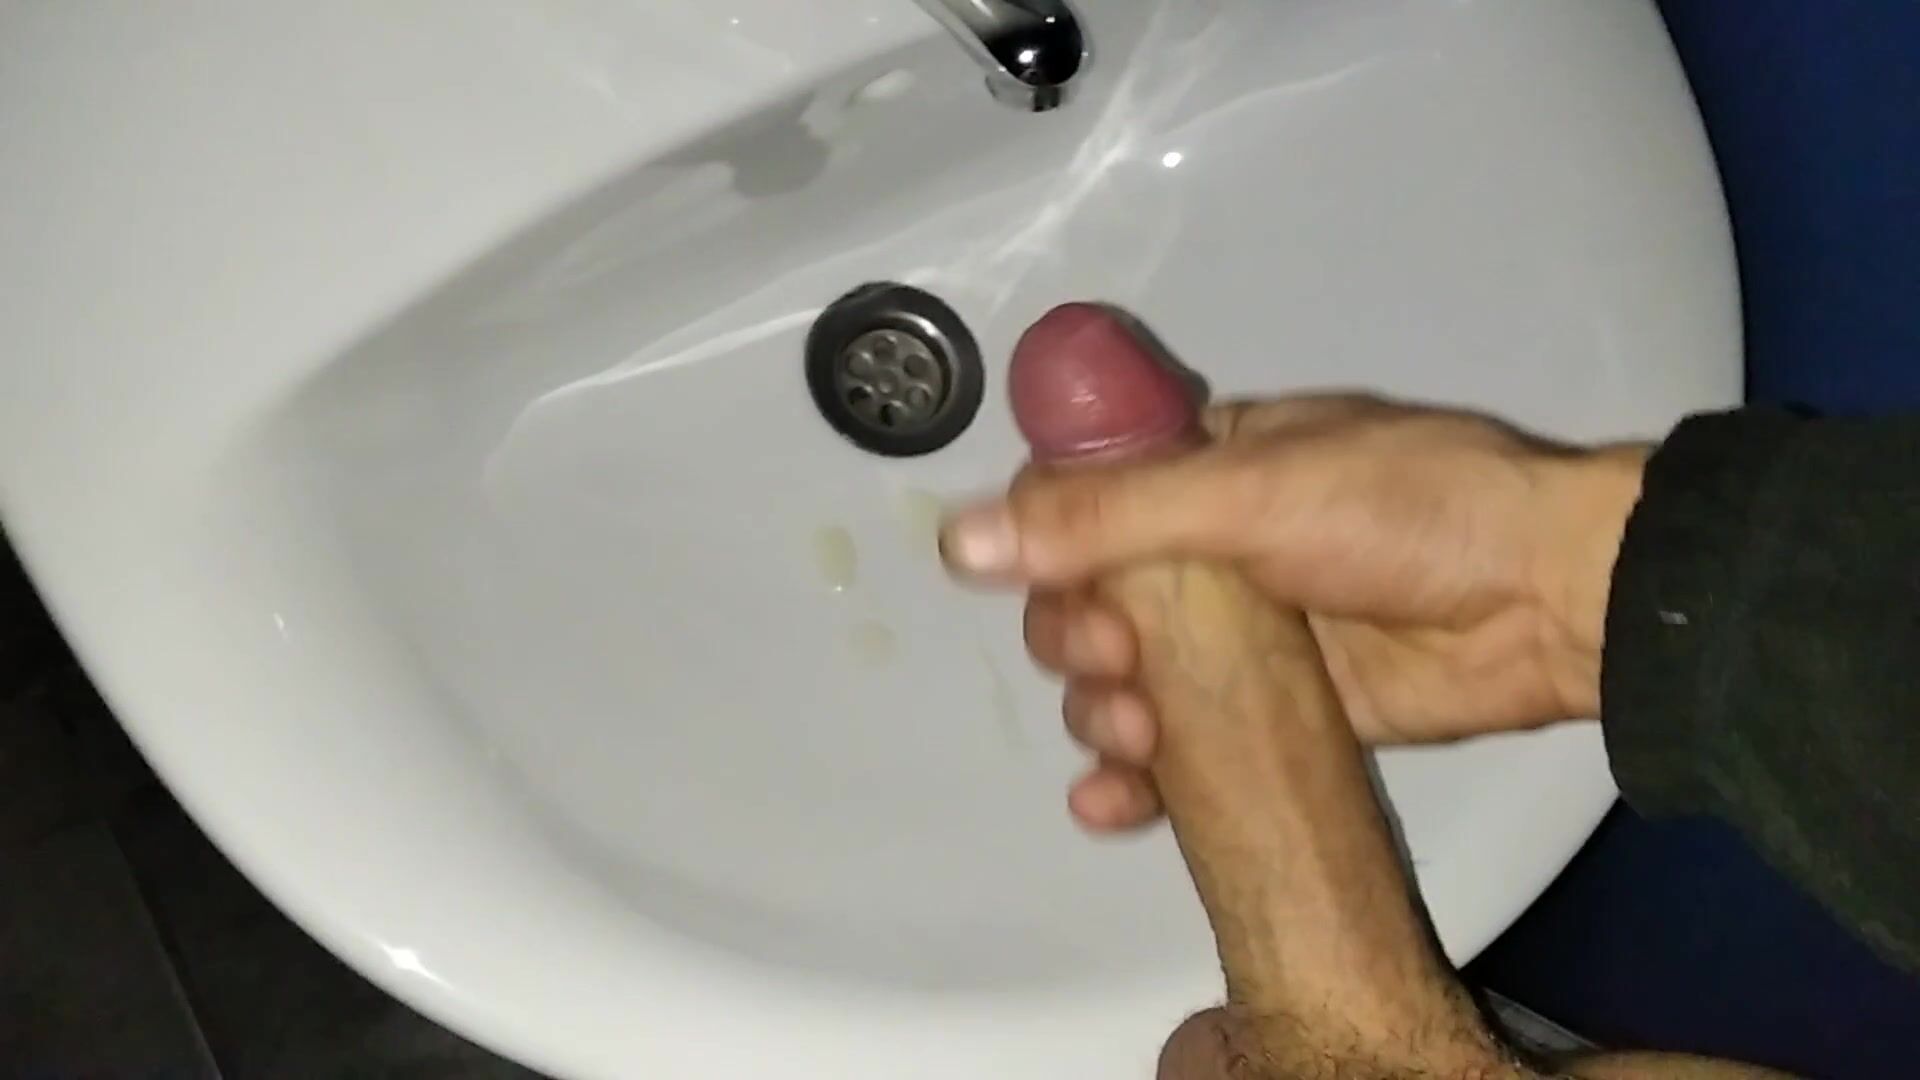 brown bown recommends how to masturbate in the bathroom pic